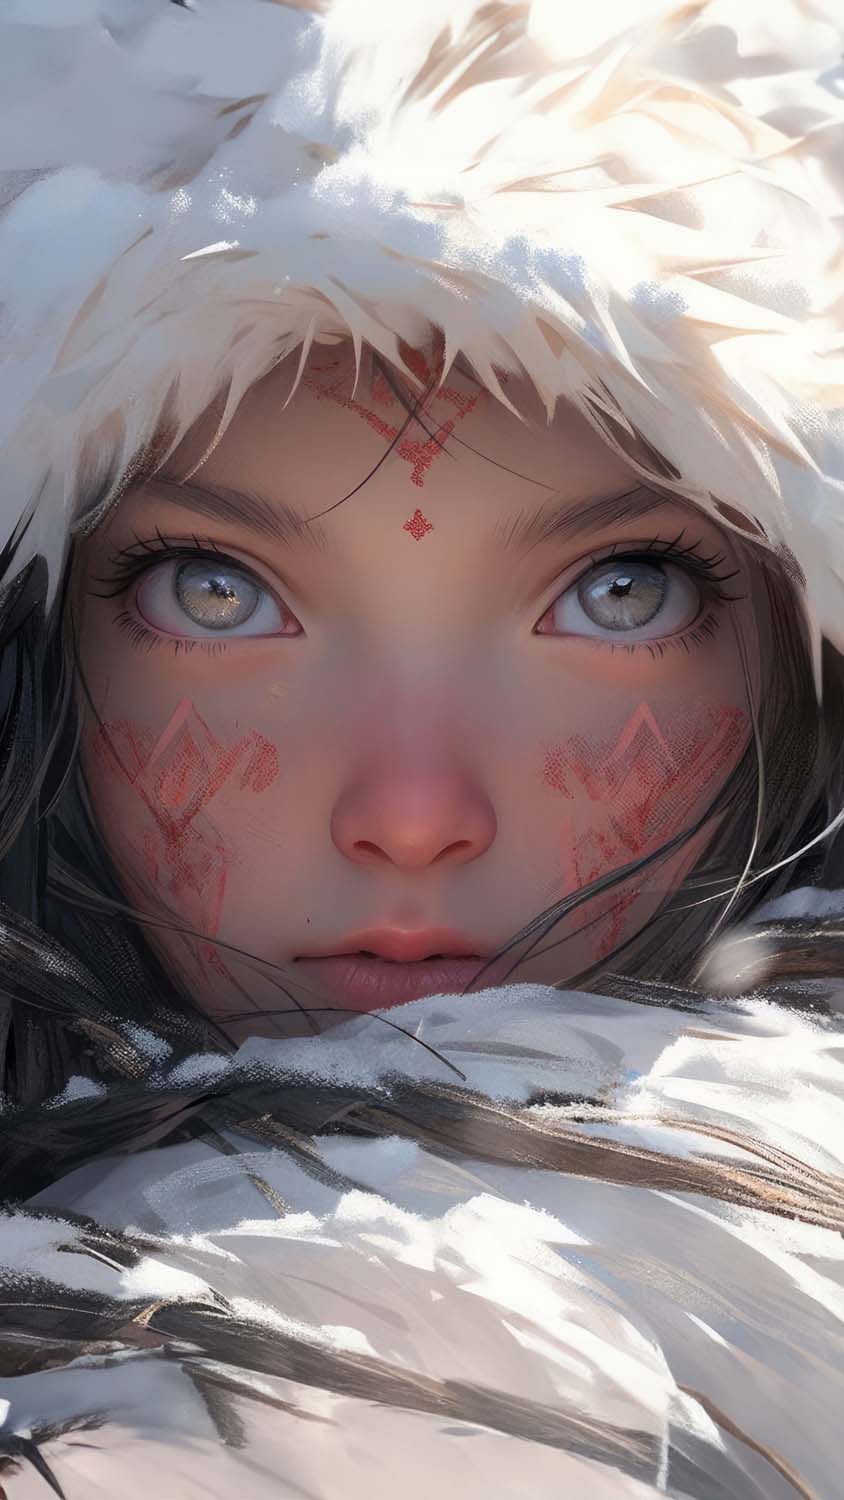 Tribe girl of north Cool Wallpapers